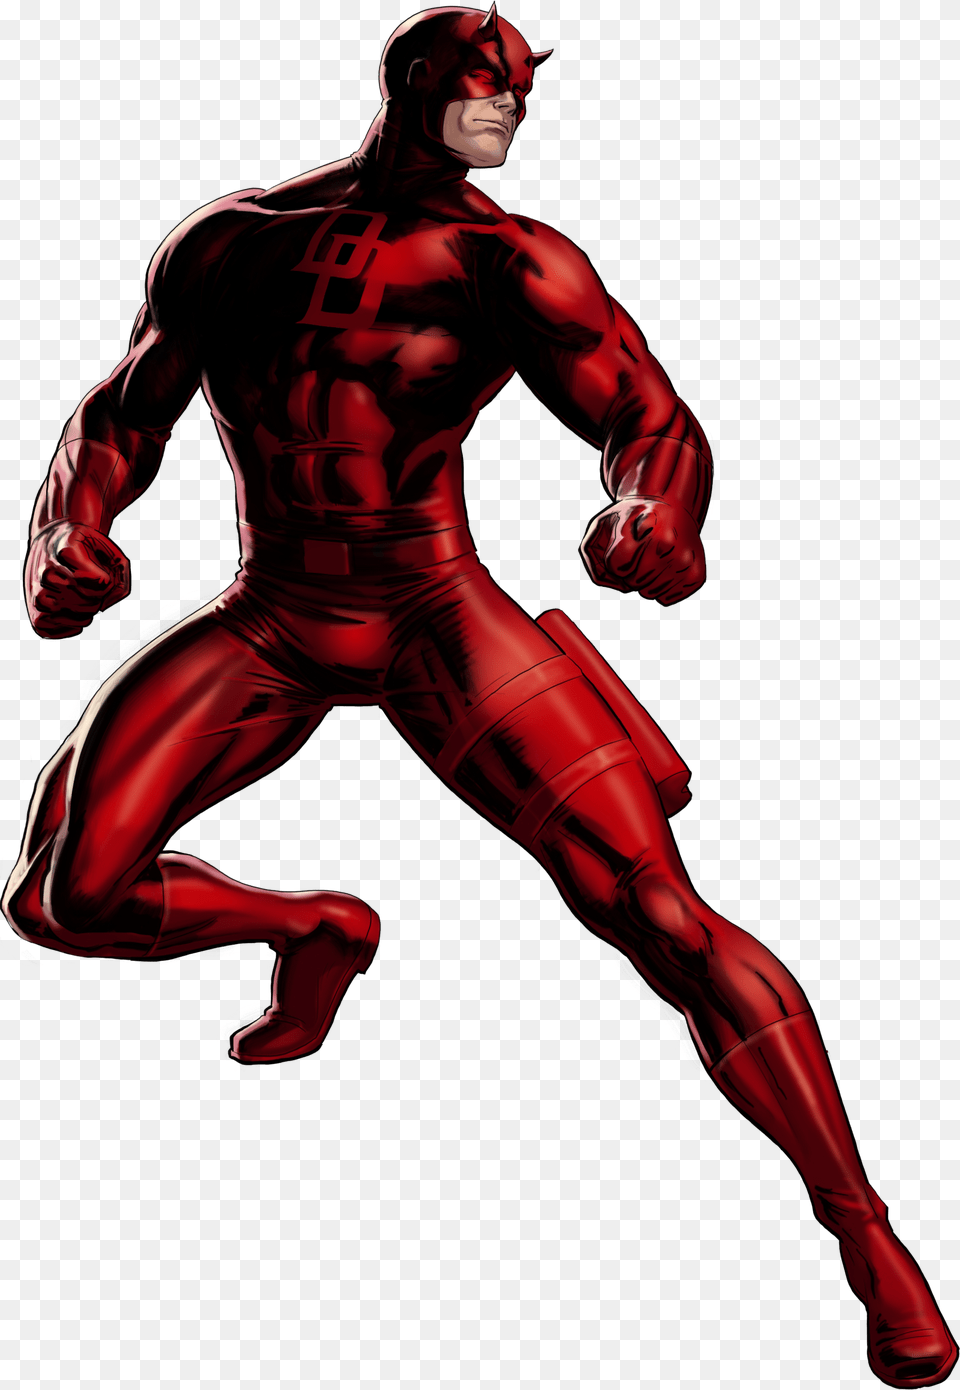 Avengers Alliance Daredevil Black Widow Black Panther Daredevil, Adult, Male, Man, Person Png